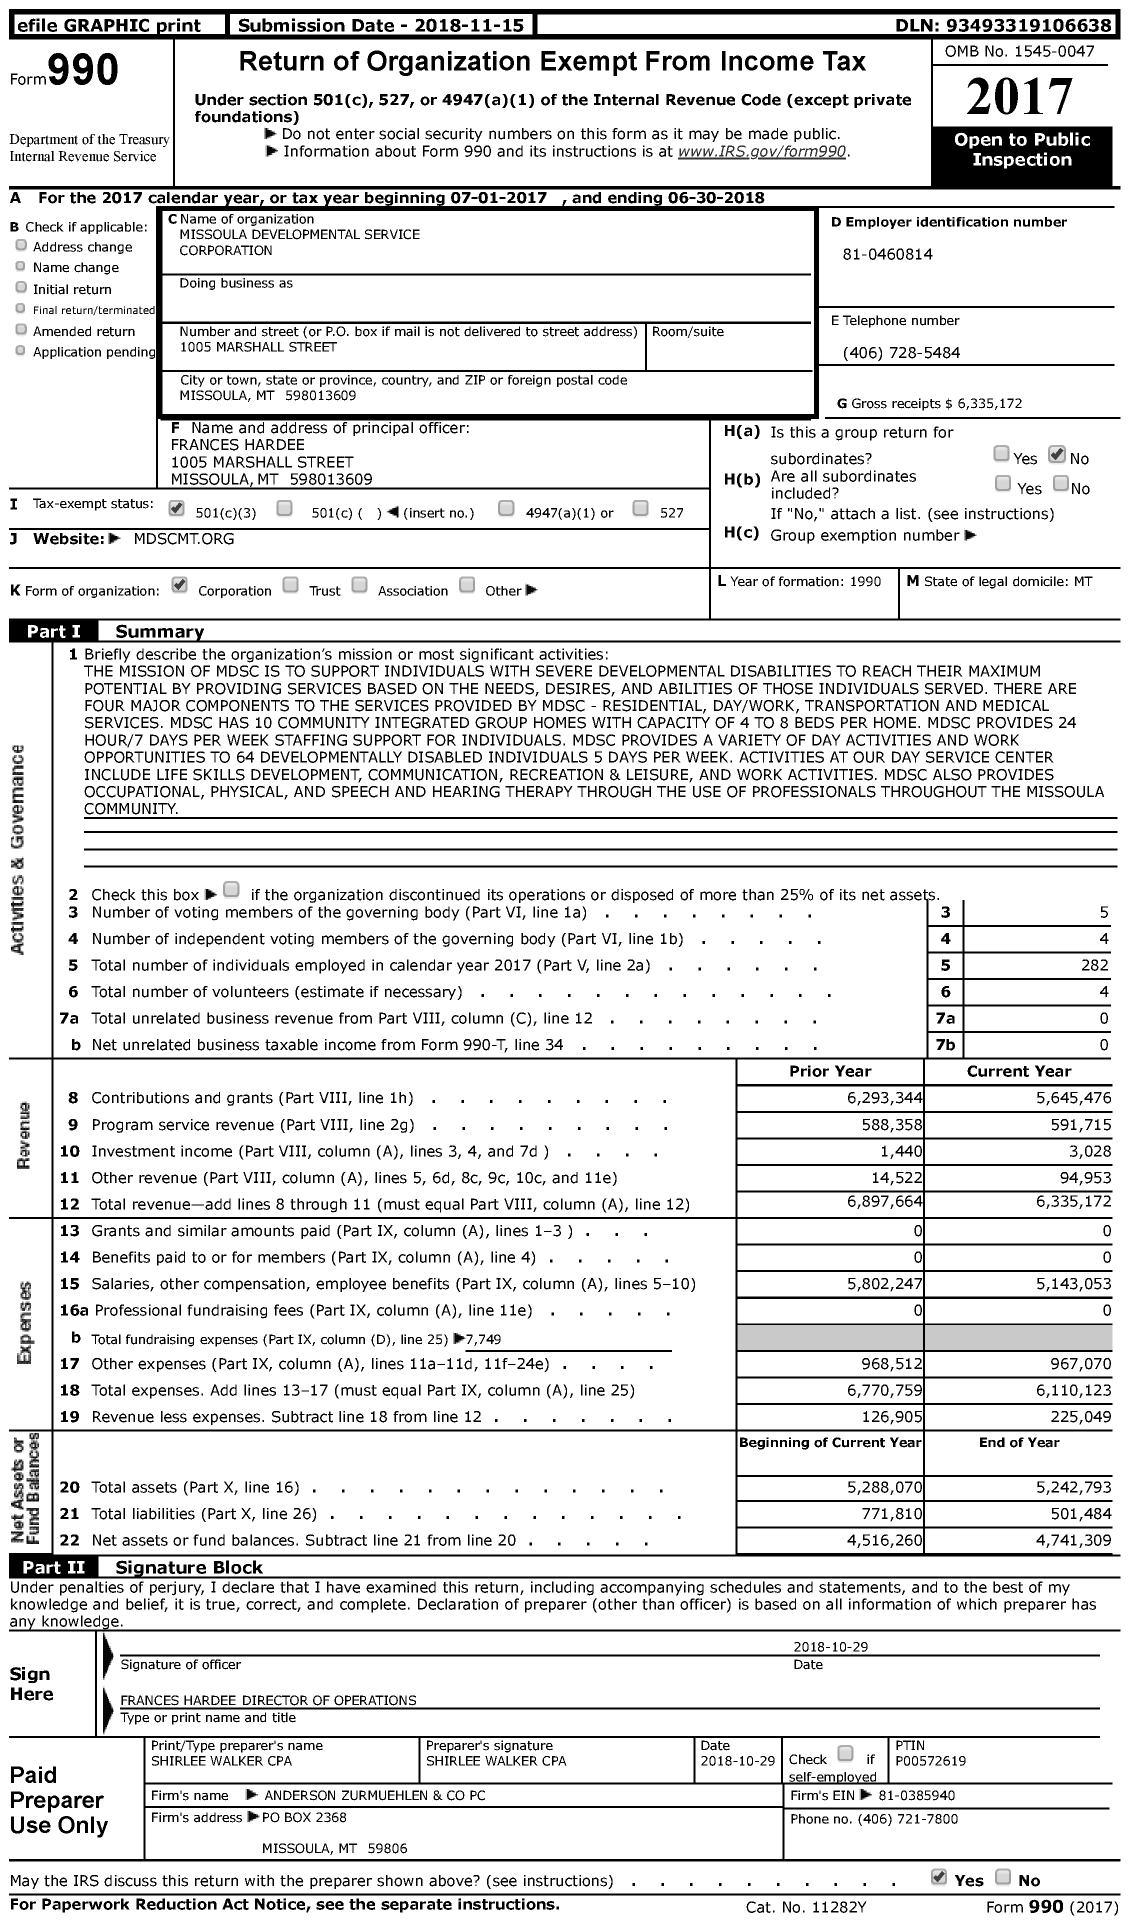 Image of first page of 2017 Form 990 for Missoula Developmental Service Corporation (MDSC)